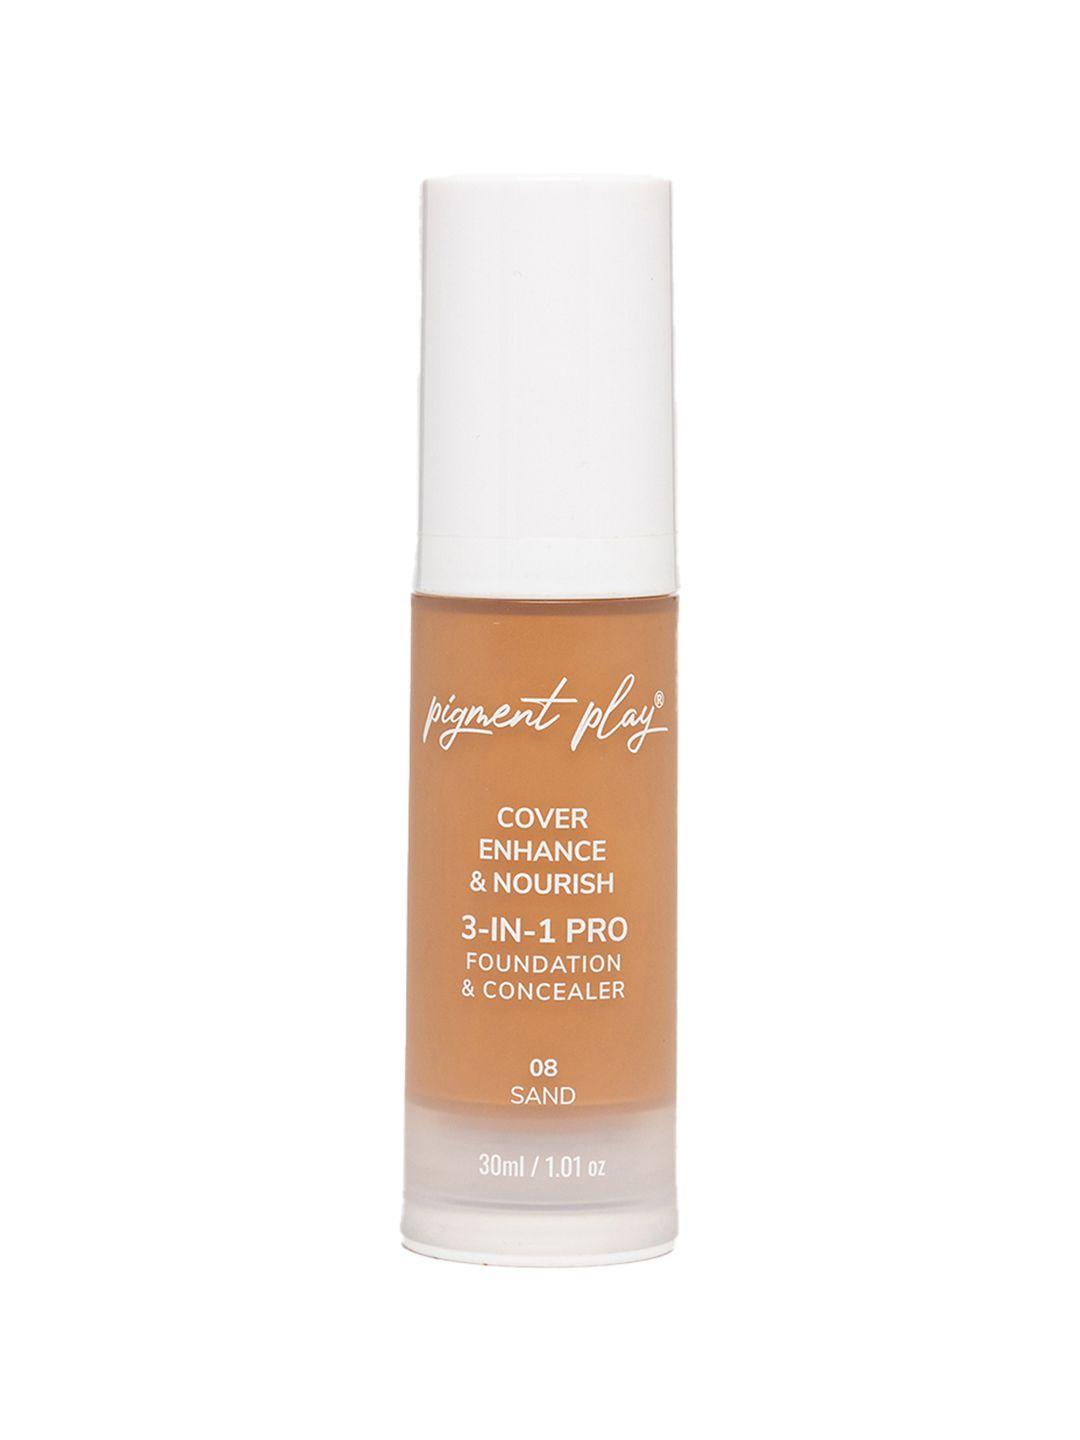 pigment play cover enhance & nourish 3-in-1 pro foundation & concealer 30ml - sand 08